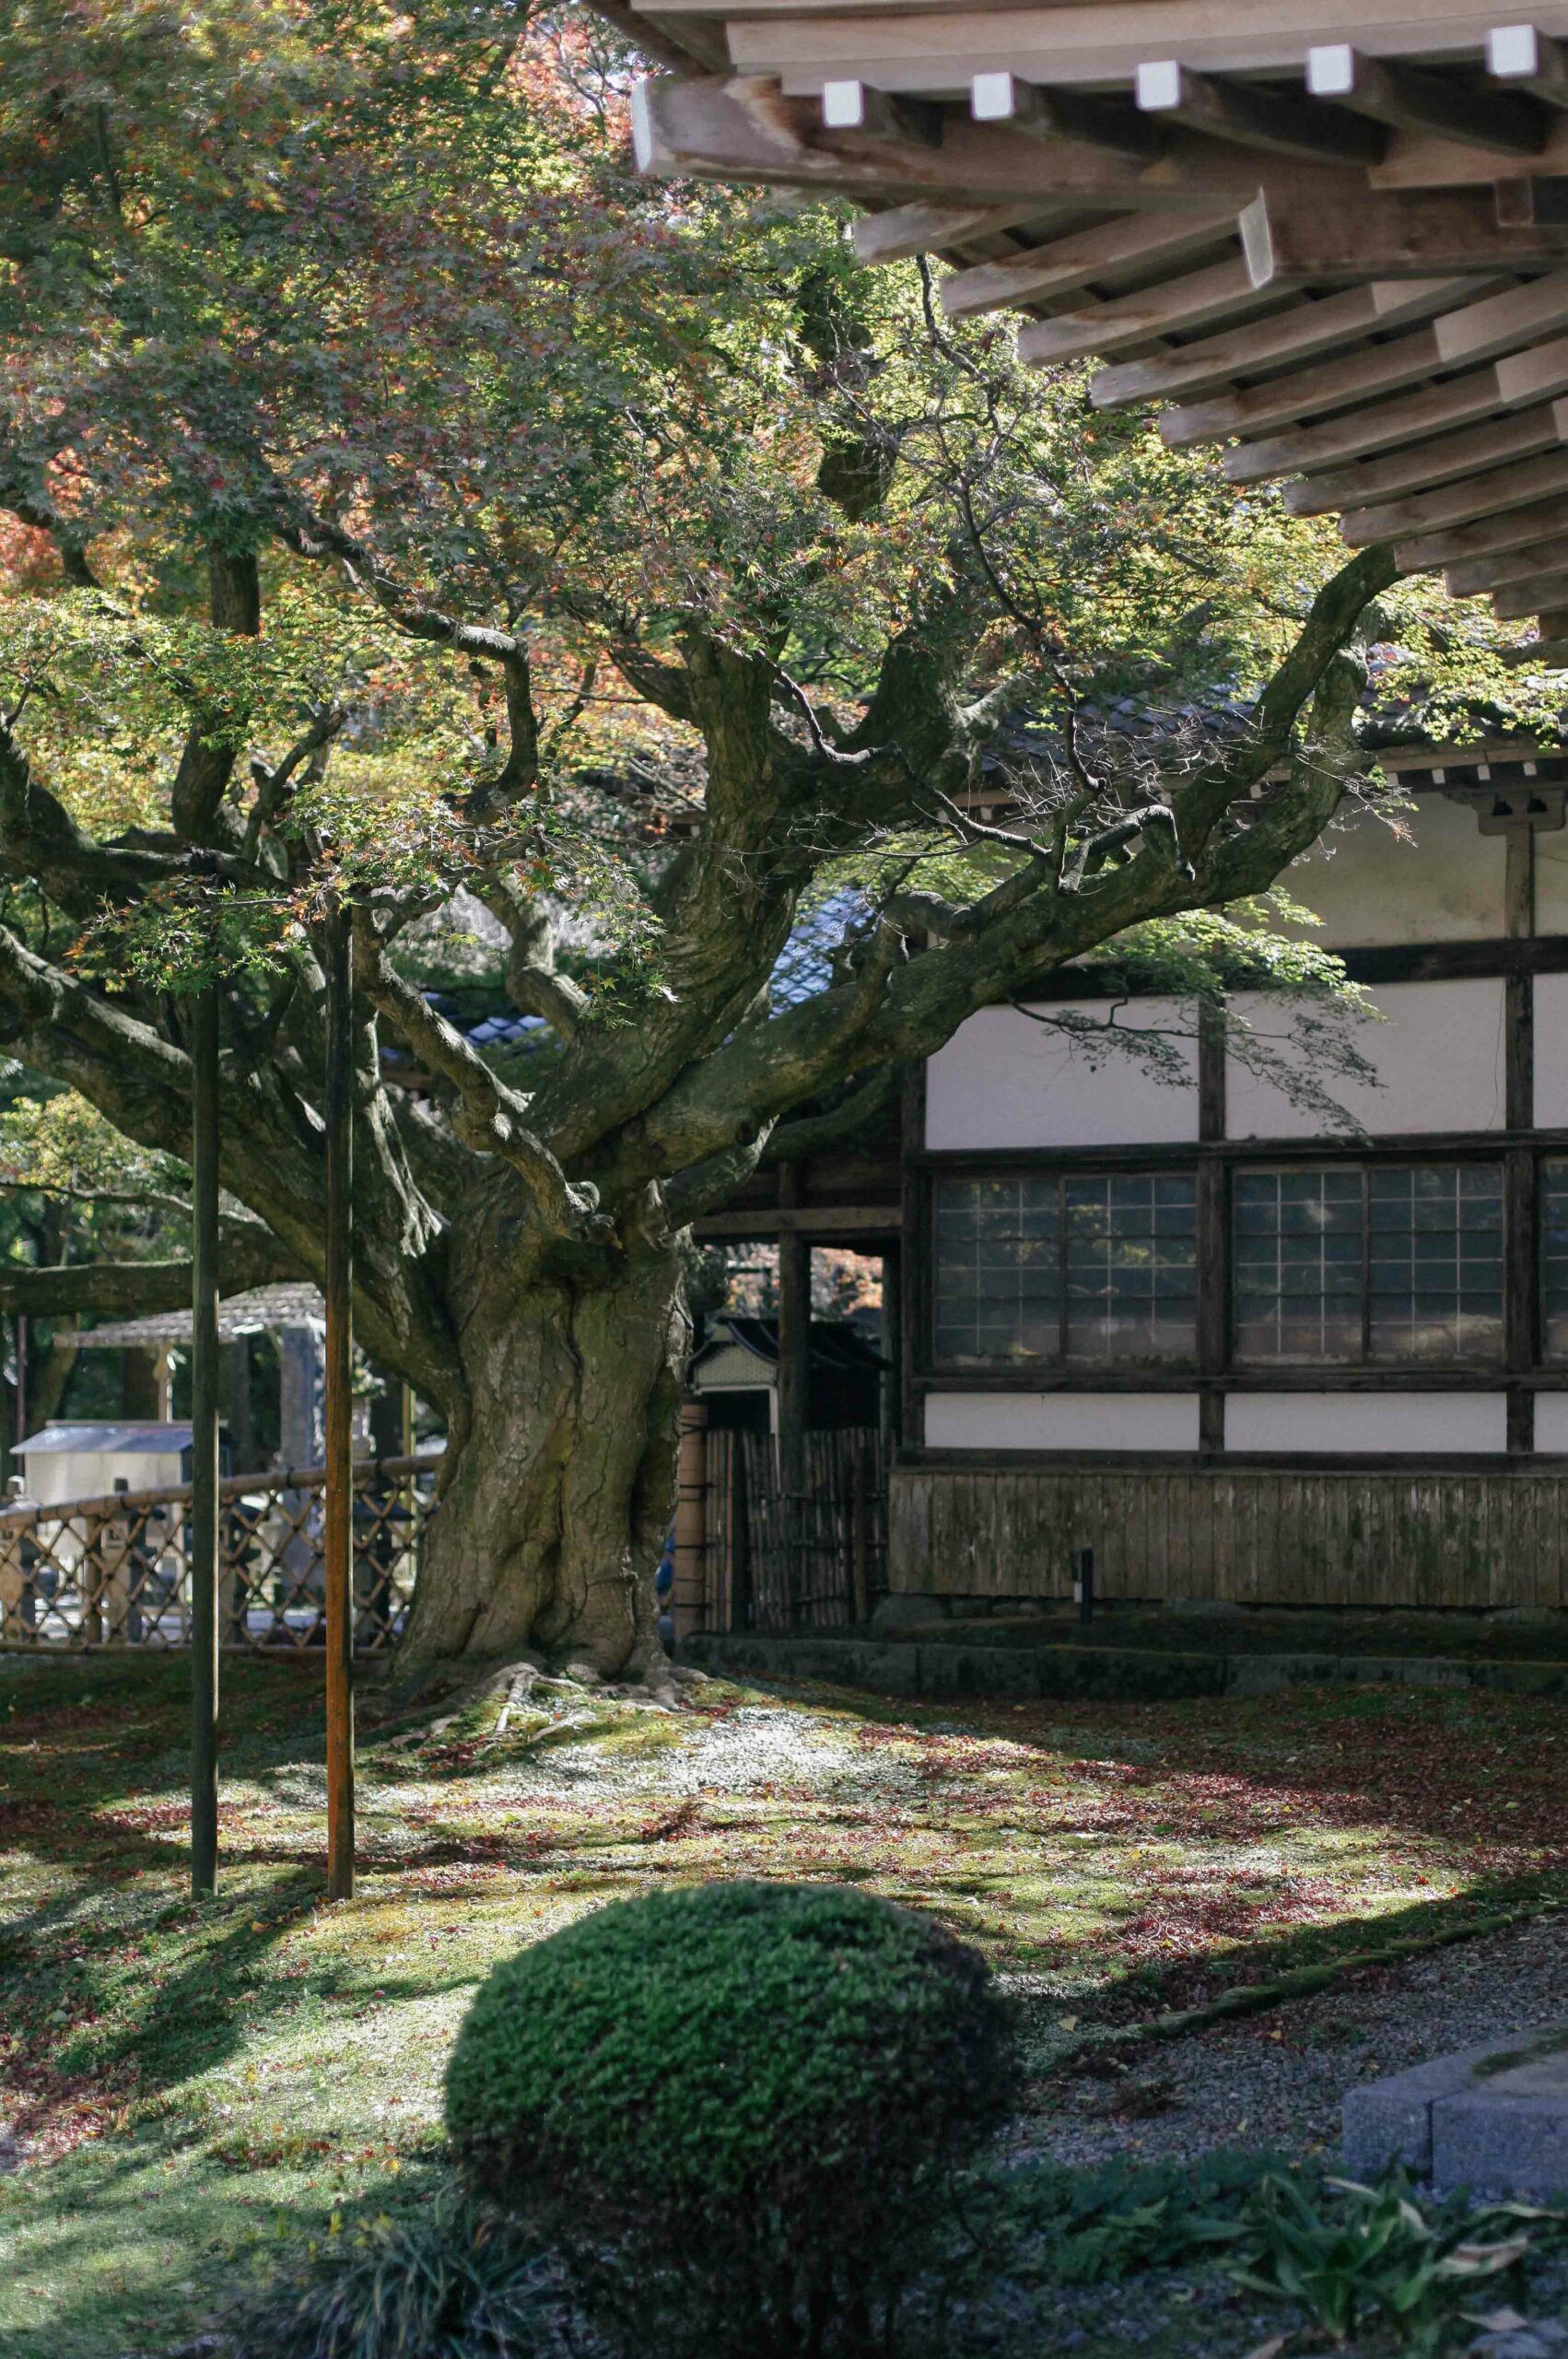 Within the temple courtyard at Raizan Sennyoji, an enormous Japanese maple casts shadows on the plaster walls.